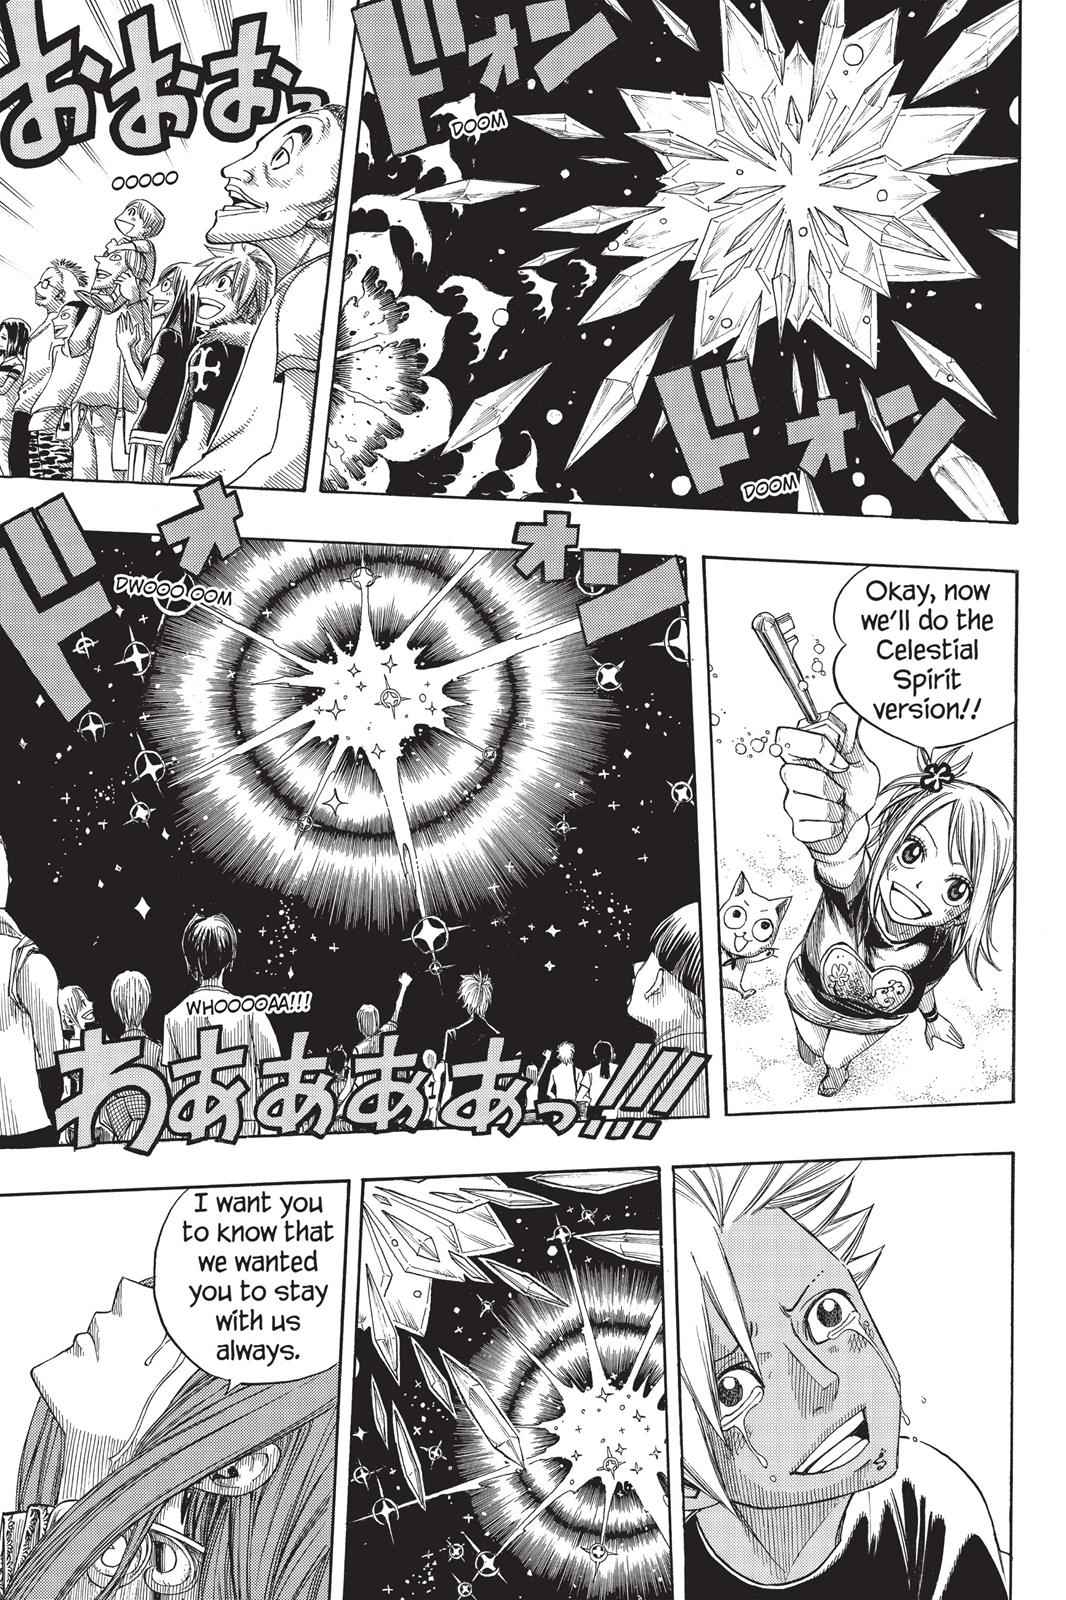  Chapter 102 image 013